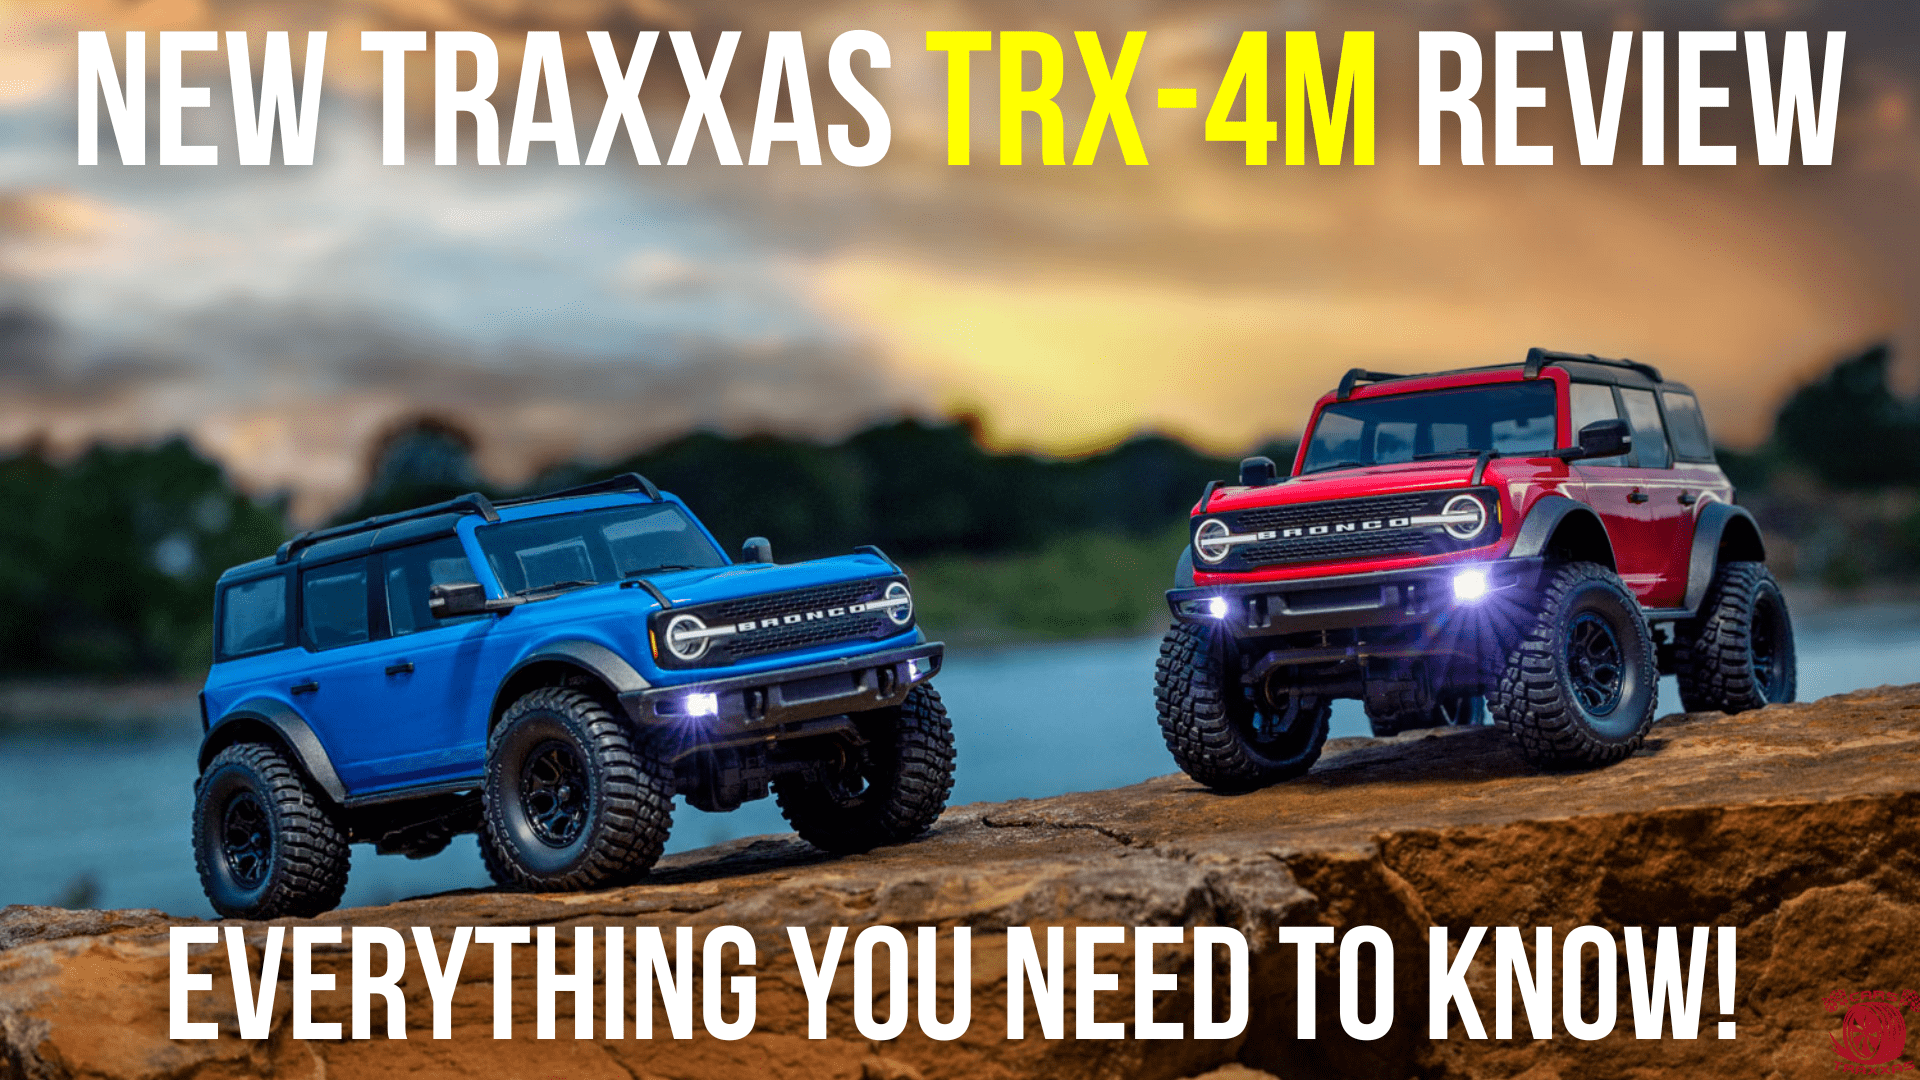 NEW Traxxas TRX 4M Review. Everything You Need To Know!